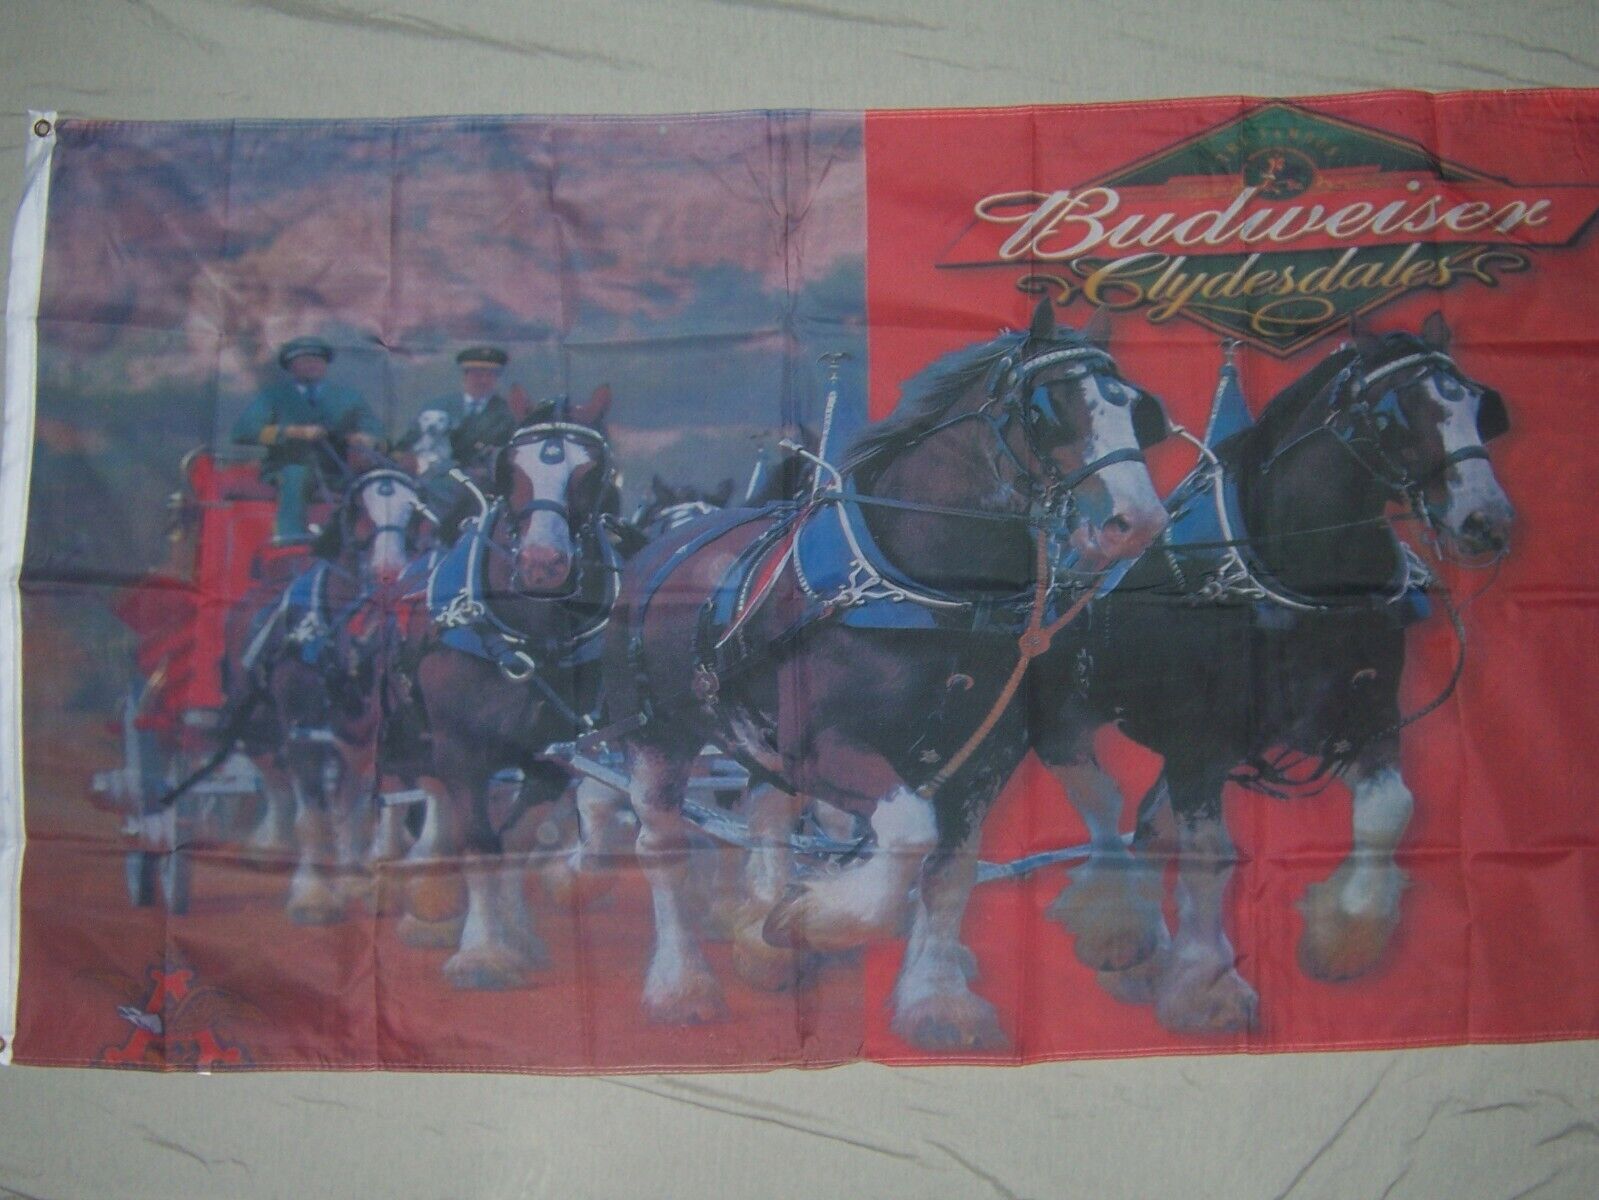  BUDWEISER BEER CLYDESDALE FLAG NEW 3X5FT banner sign better quality usa seller